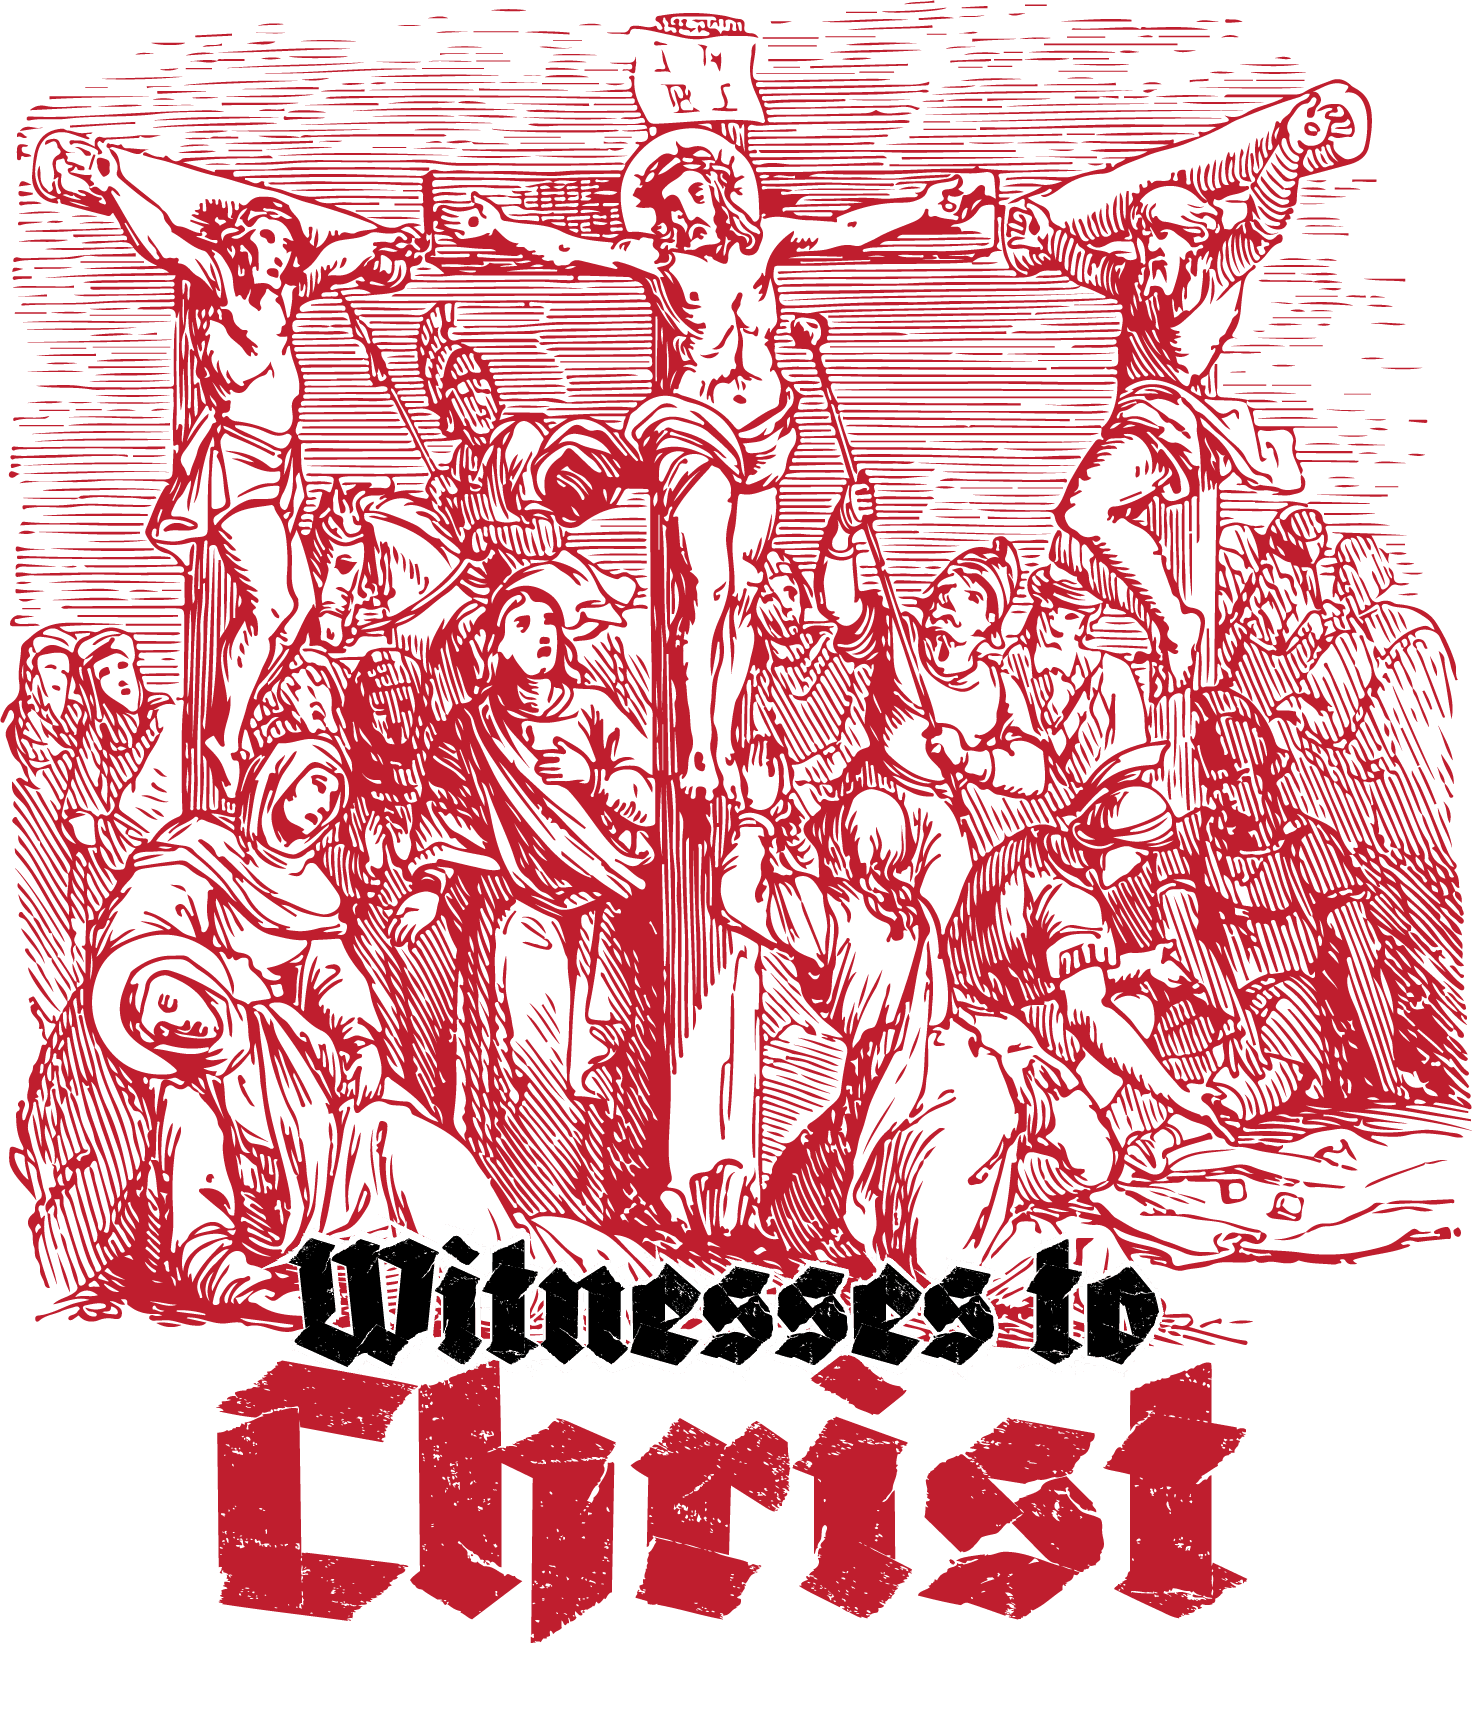 Witnesses to Christ – Mary